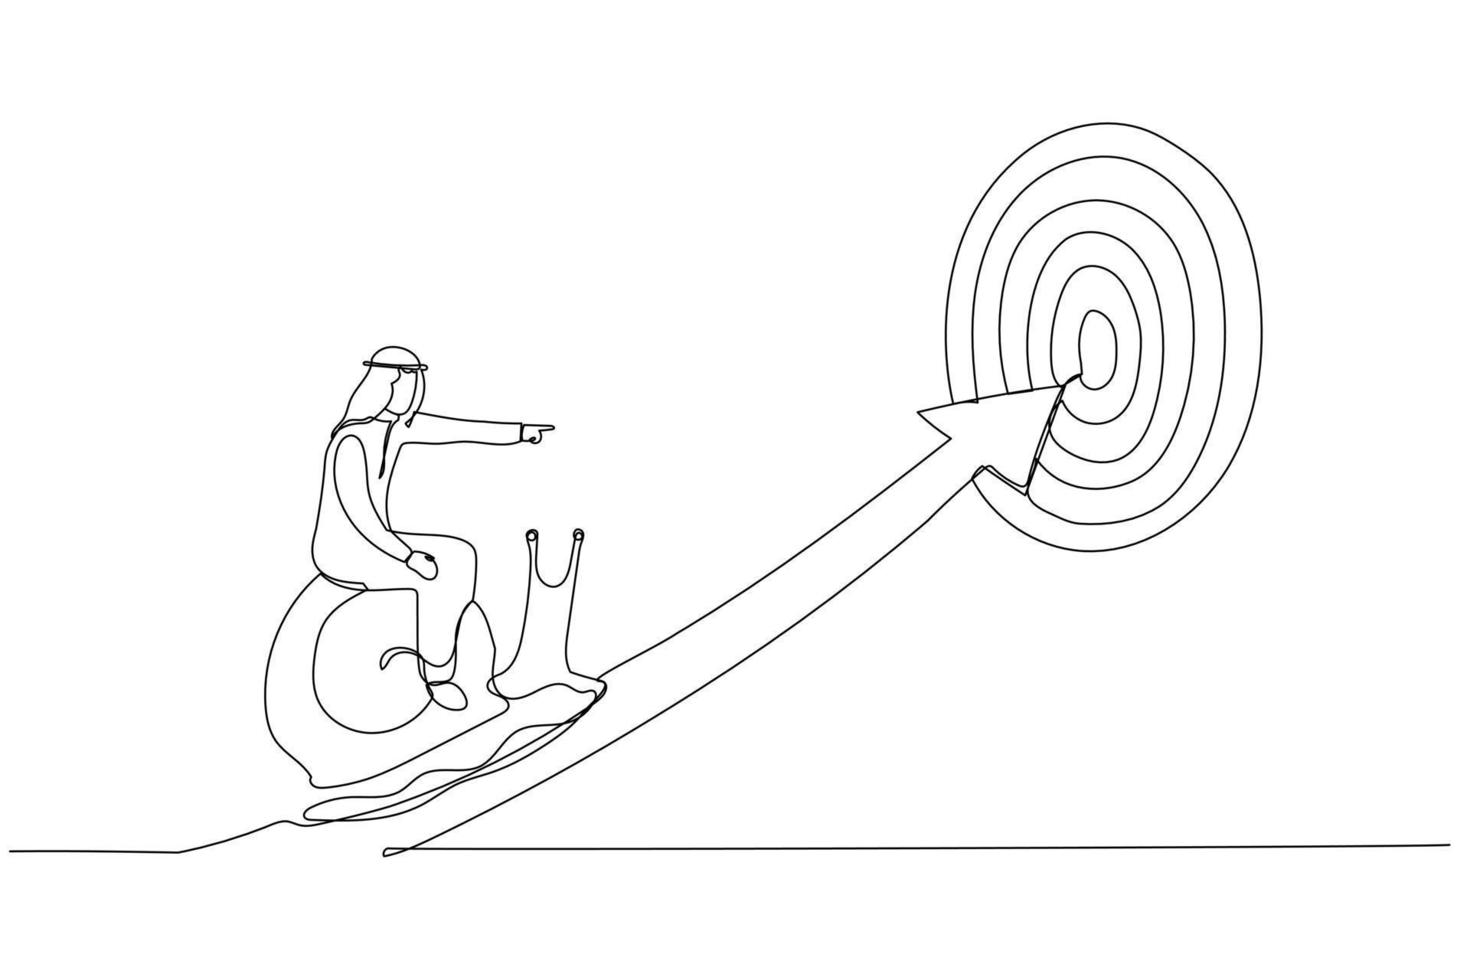 Illustration of tried arab businessman riding snail slow walking on arrow to reach target. Metaphor for slow business progress, laziness or procrastination. Single continuous line art vector